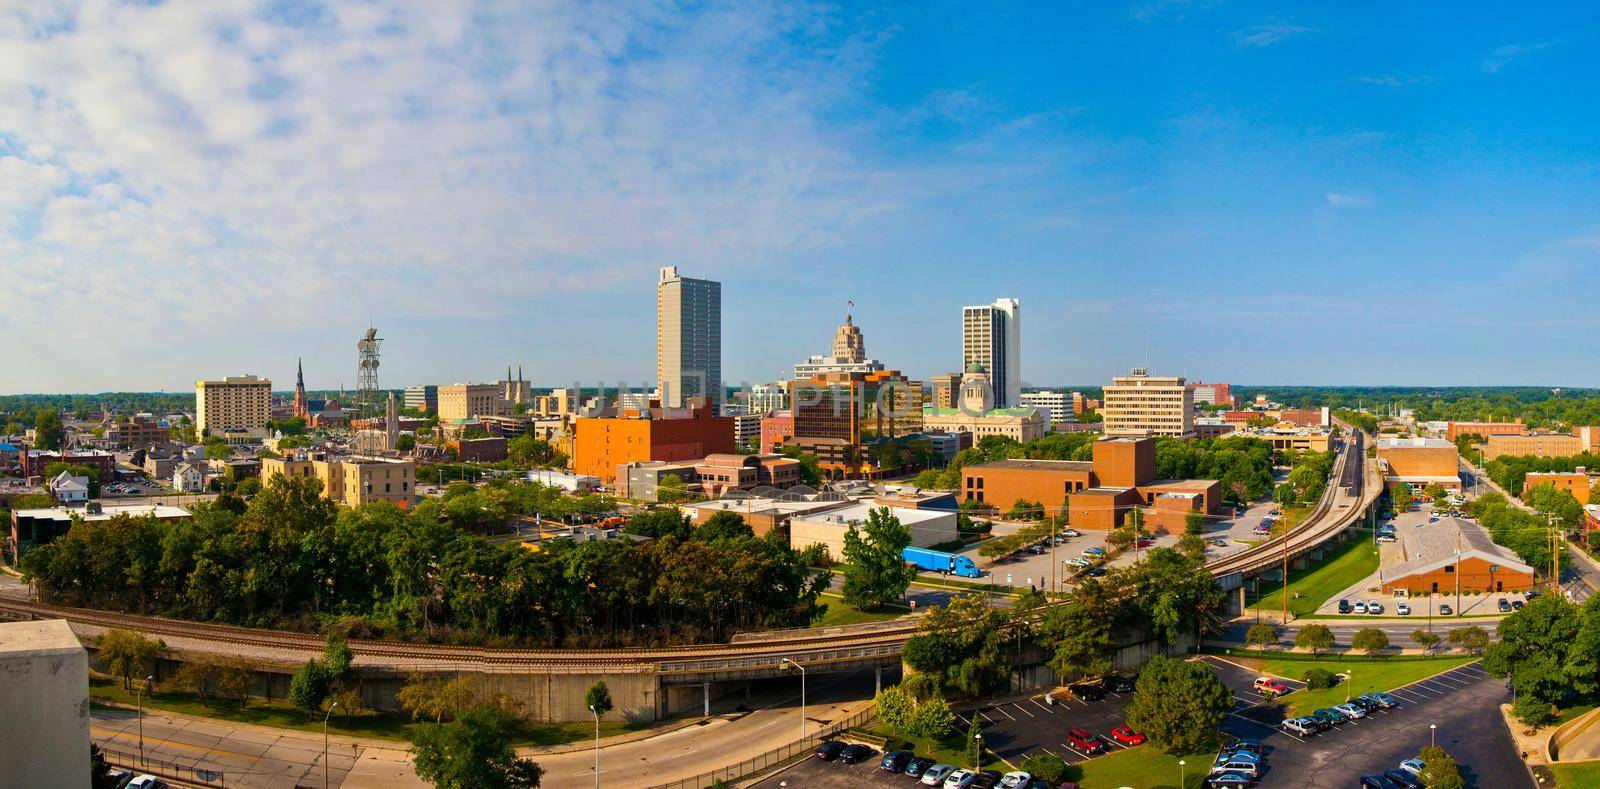 Image of Panoramic skyline of Fort Wayne with buildings and trees and roads